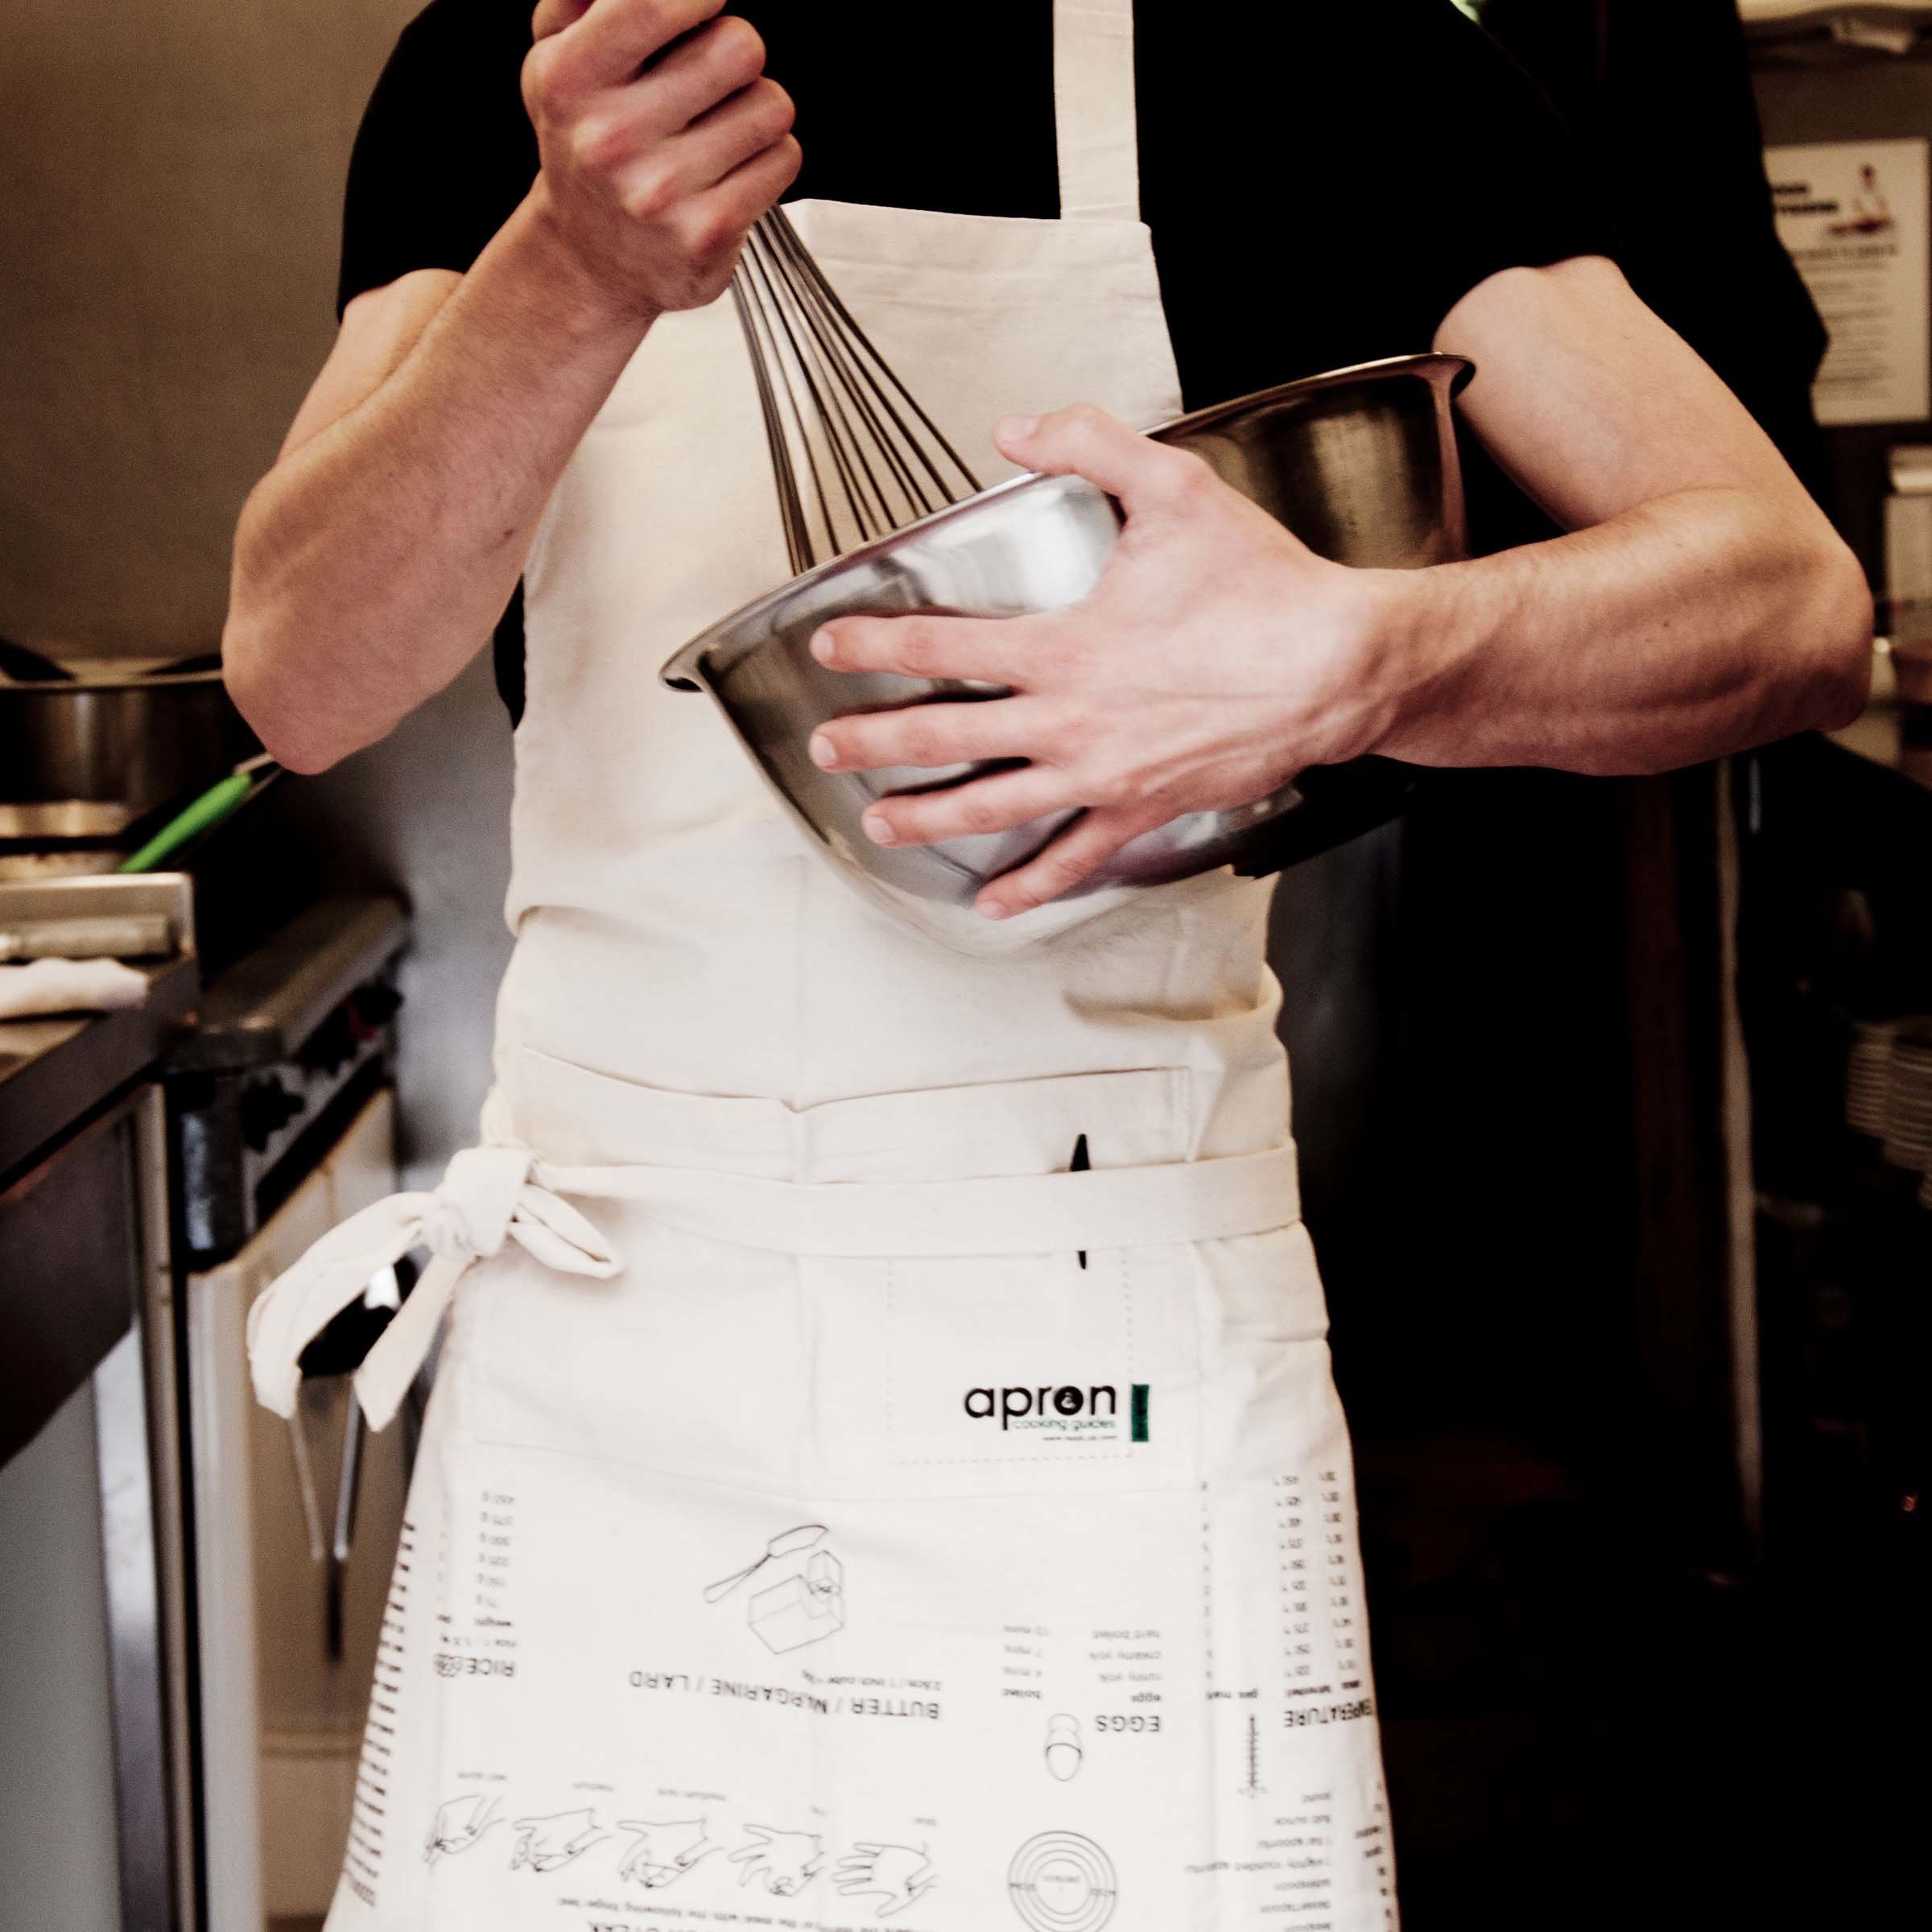 Best apron for chefs